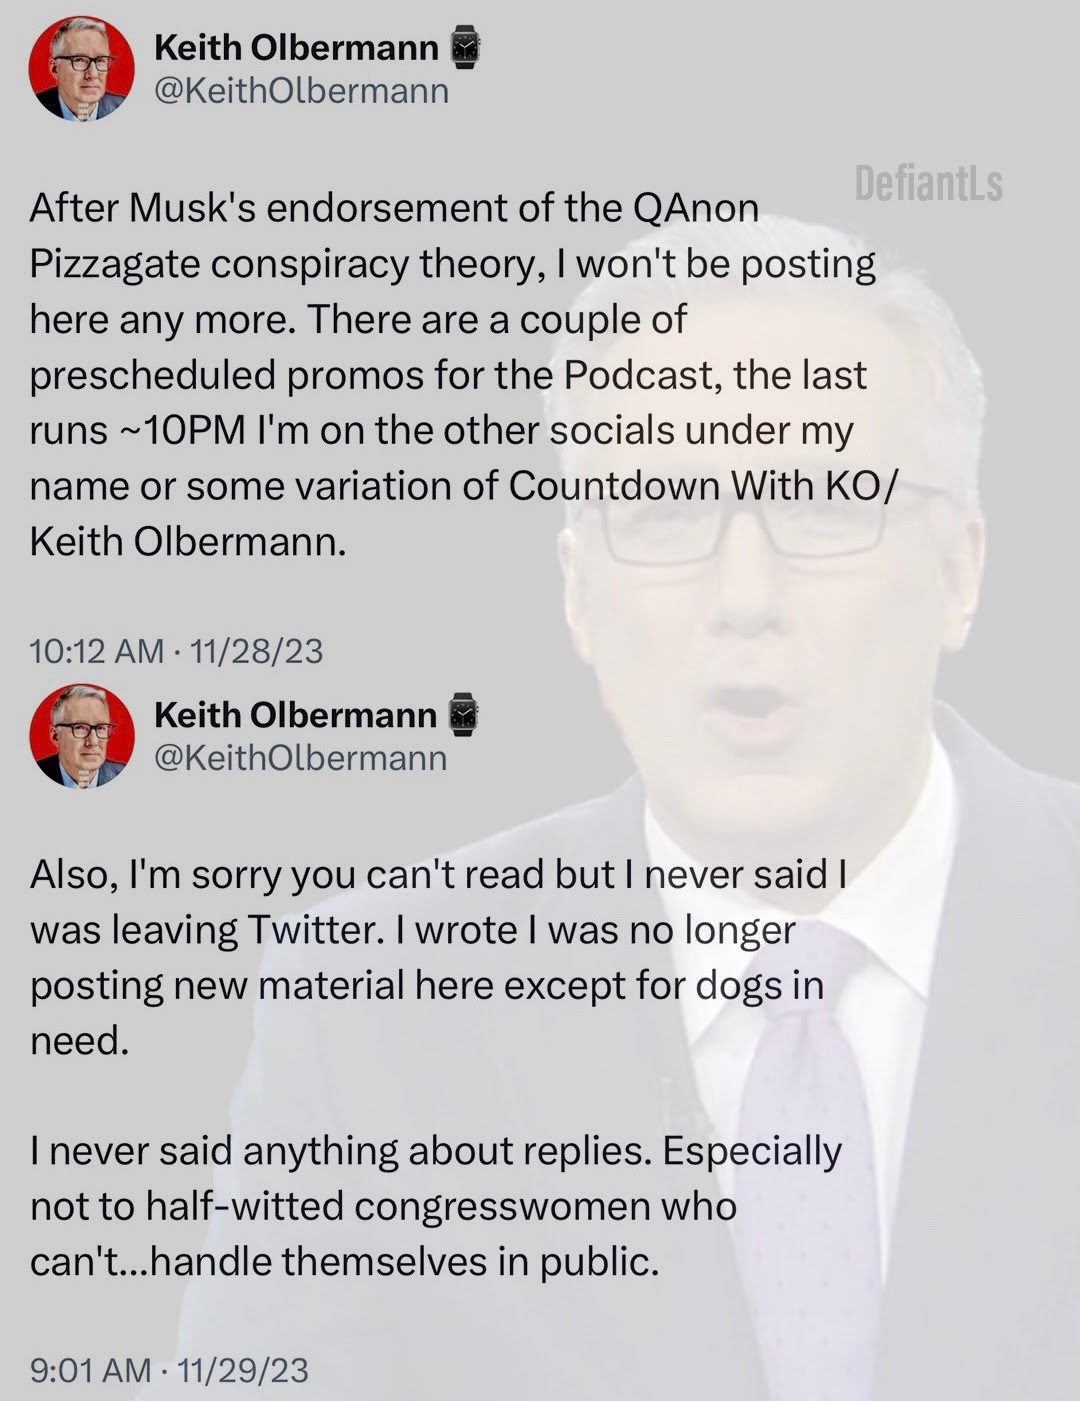 Hypocrite Keith Olbermann quits Twitter in a huff then says he never quit Twitter.